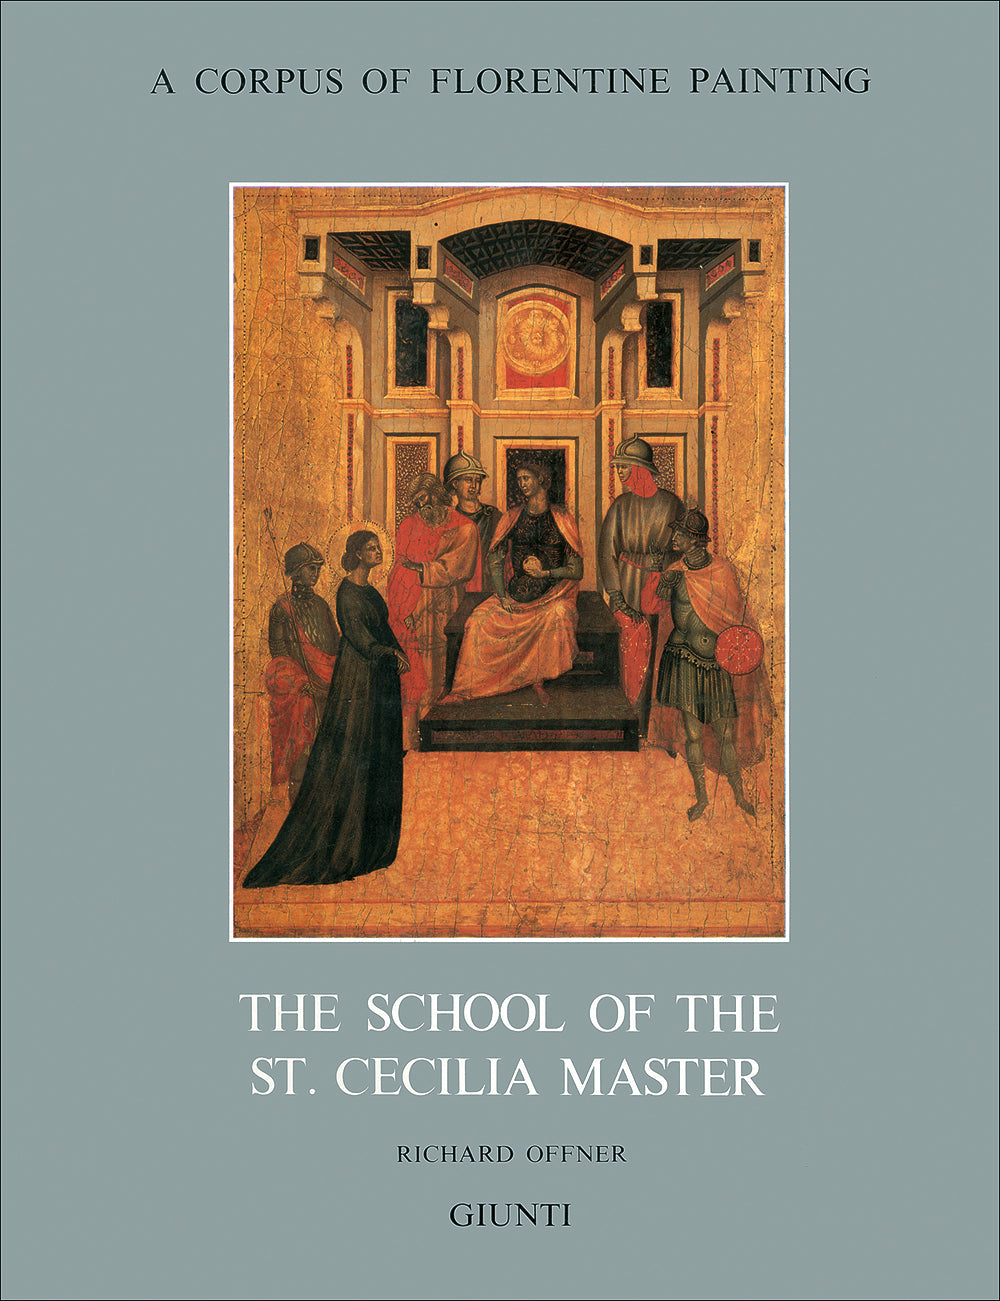 The school of St. Cecilia Master (in inglese). Section III, Volume I